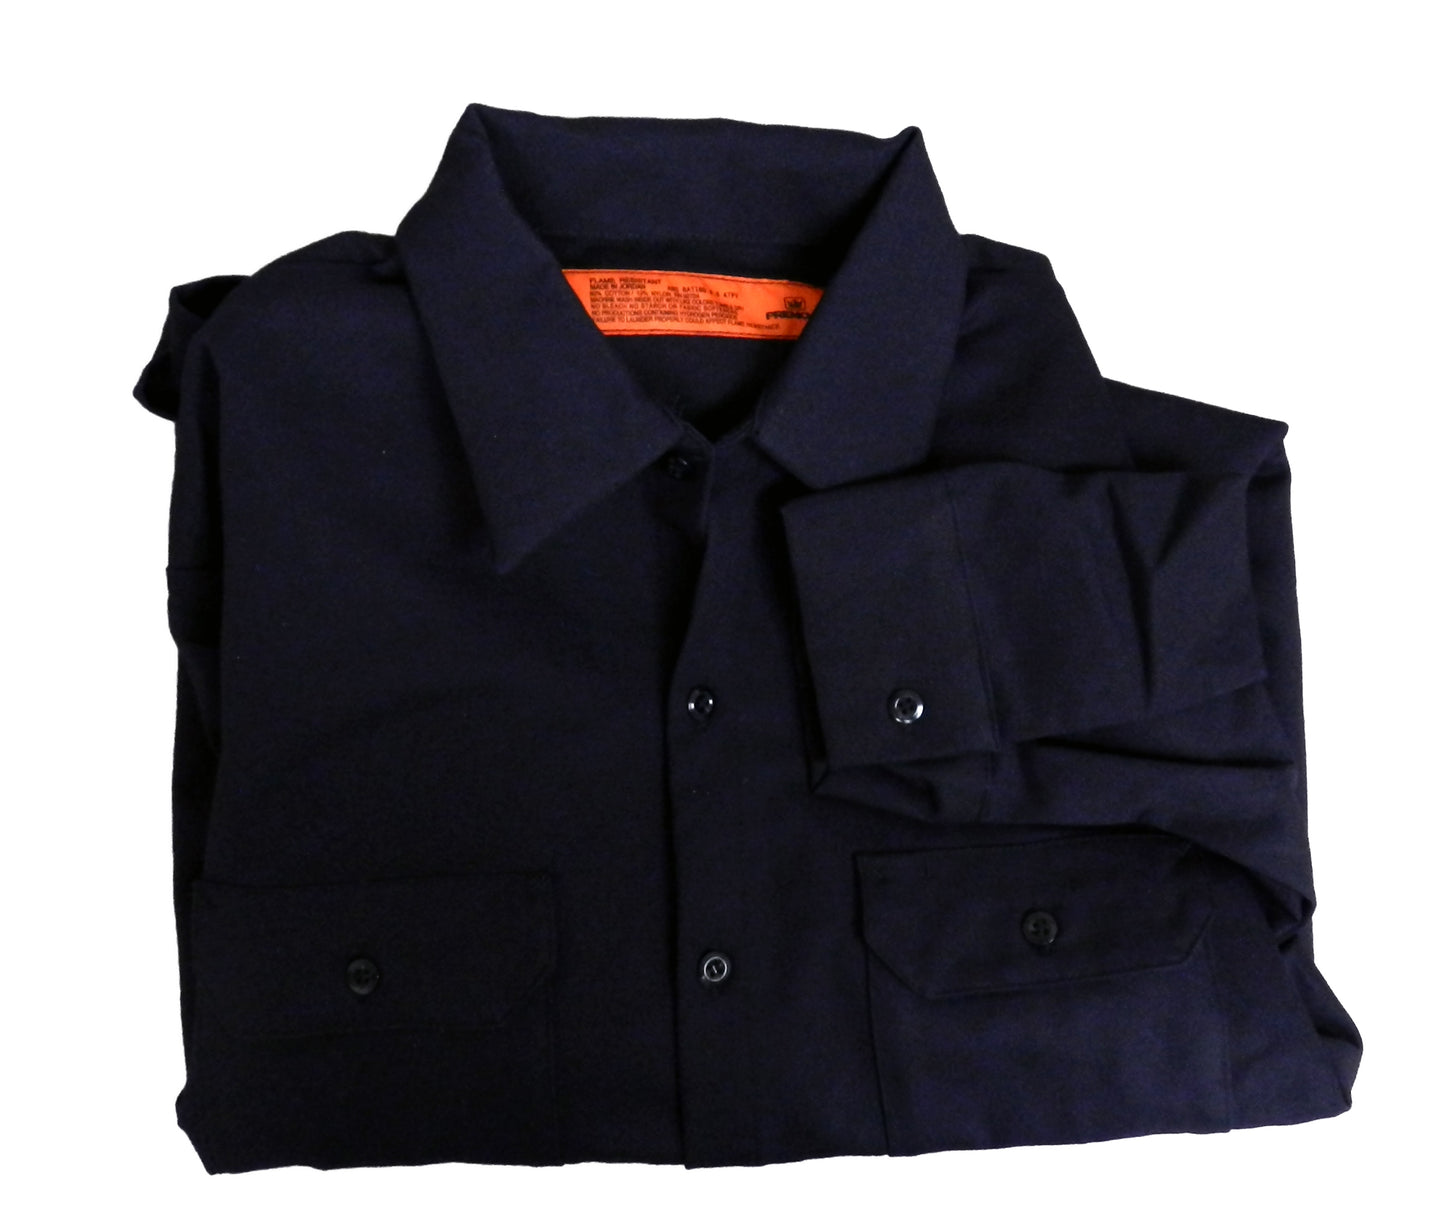 Solar 1 Clothing Industrial Fire Resistant Work Shirt